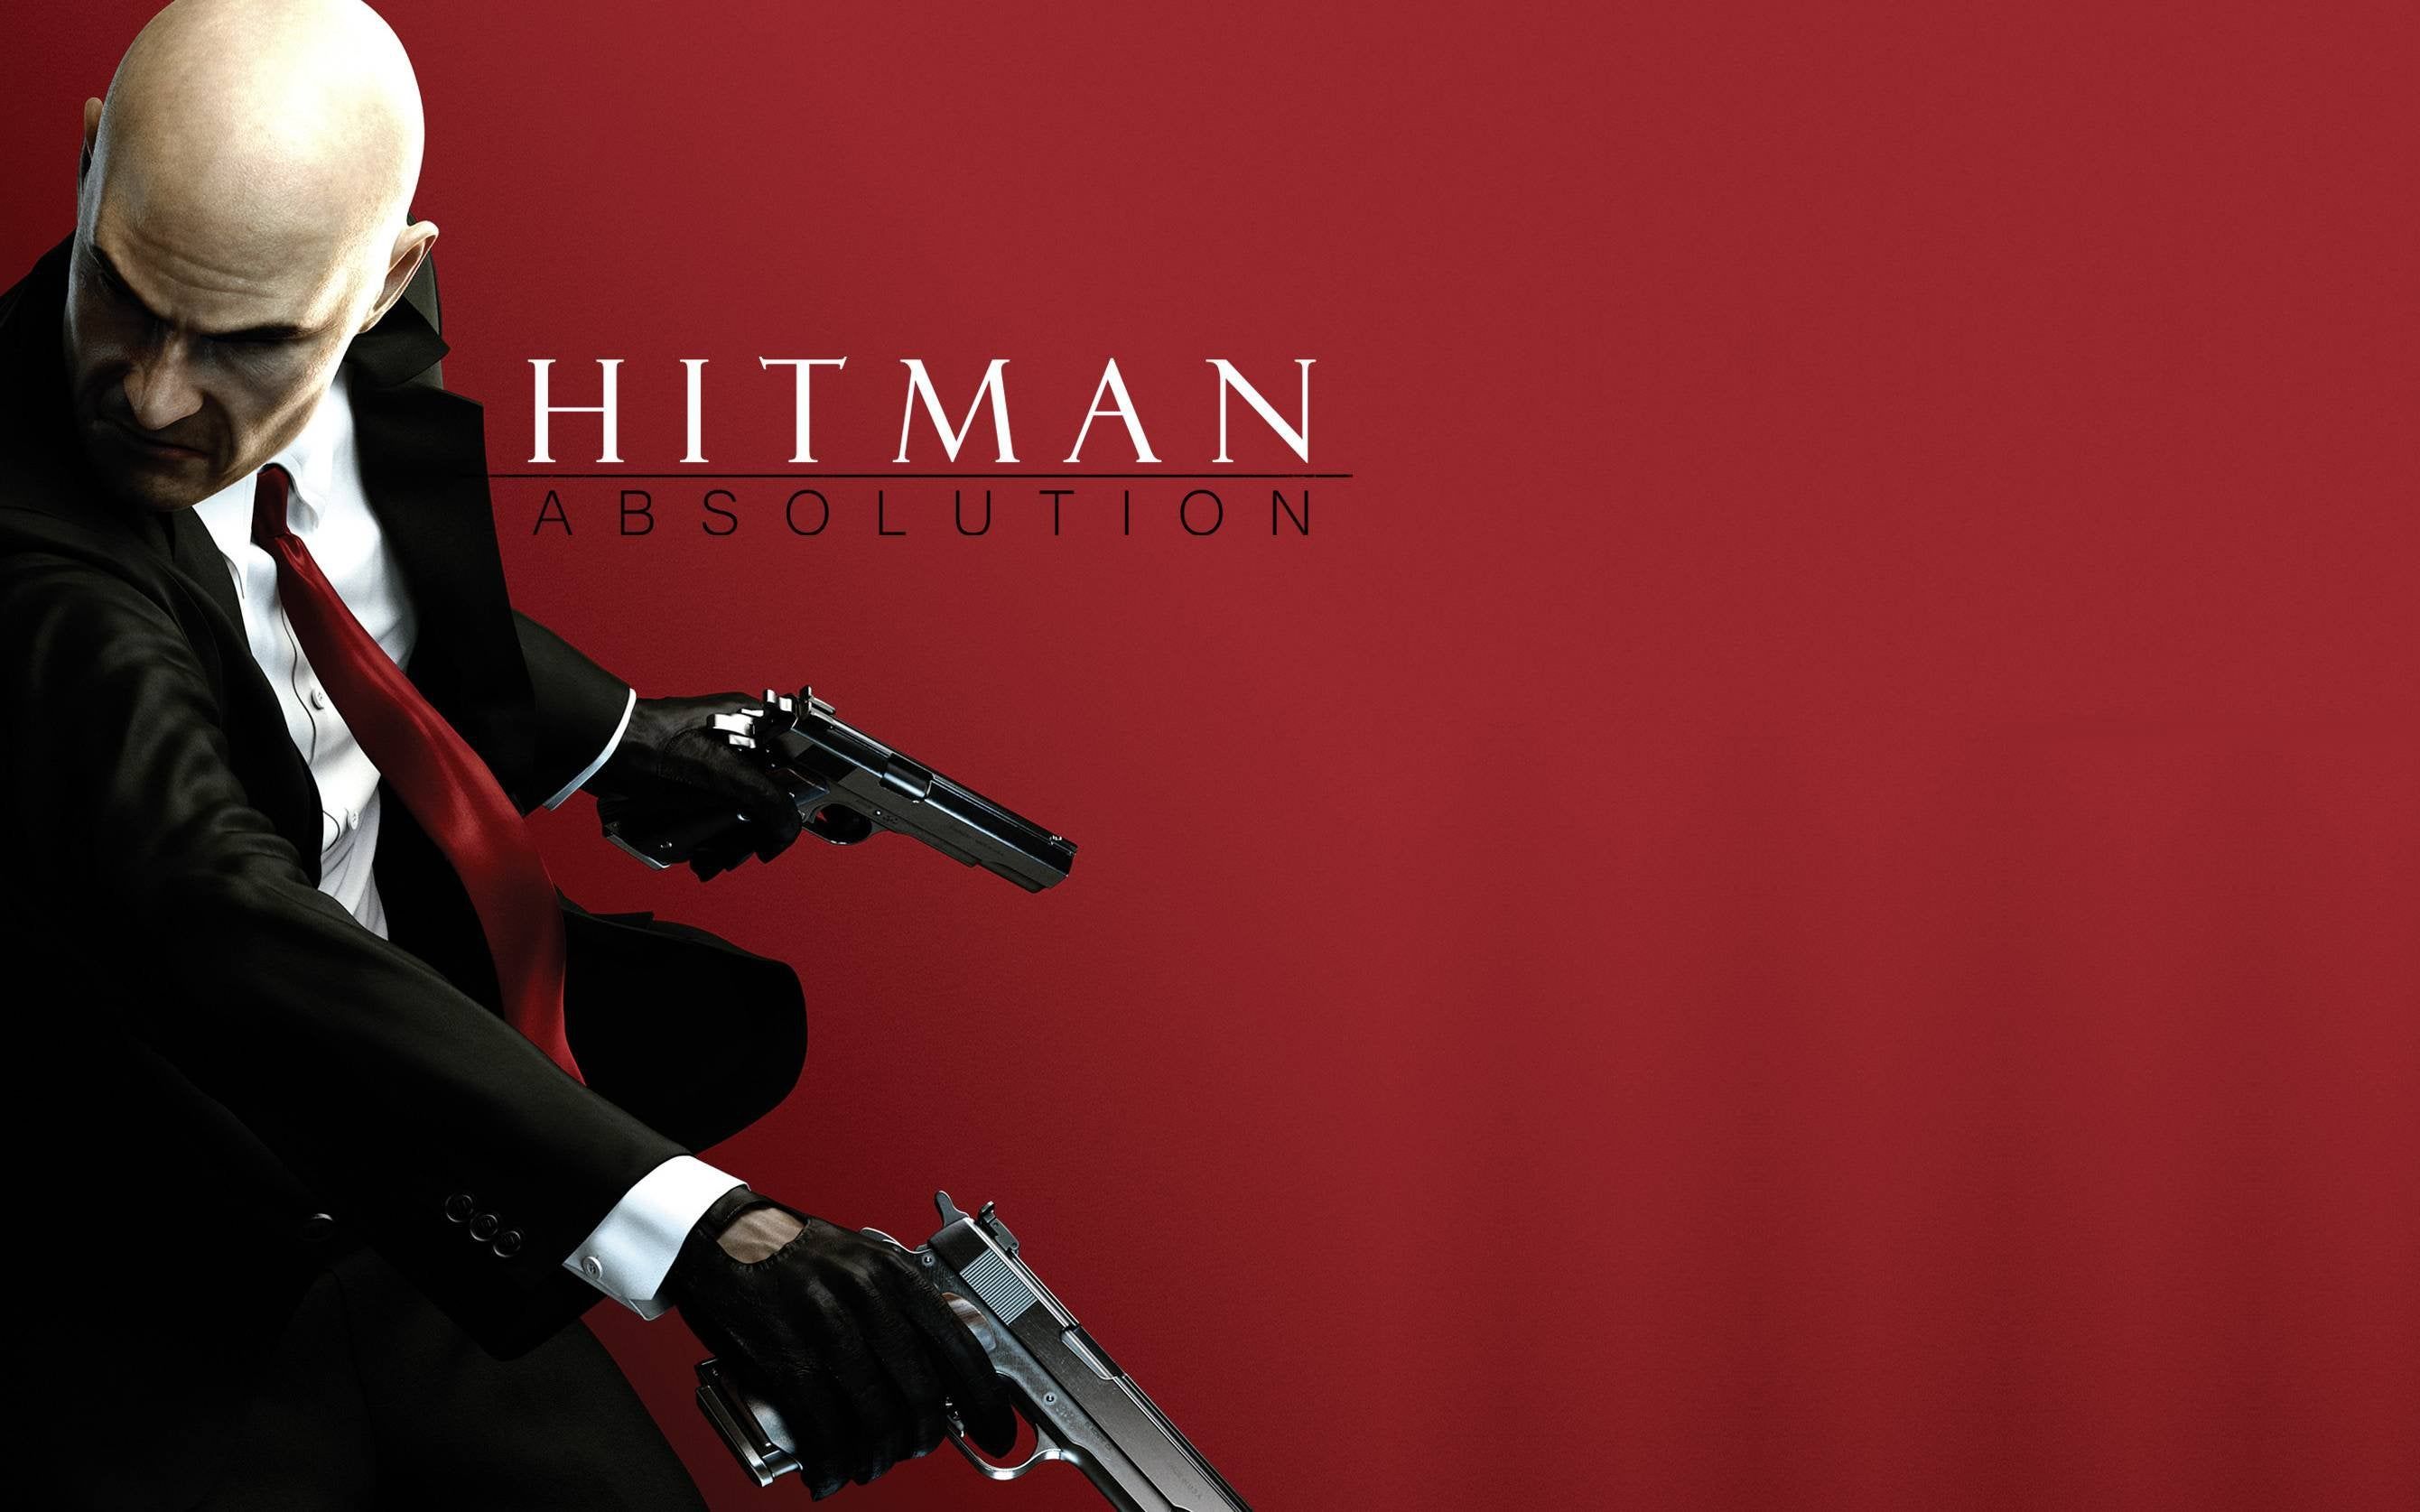 Hitman: Absolution [2680x1675]. Made from the box art